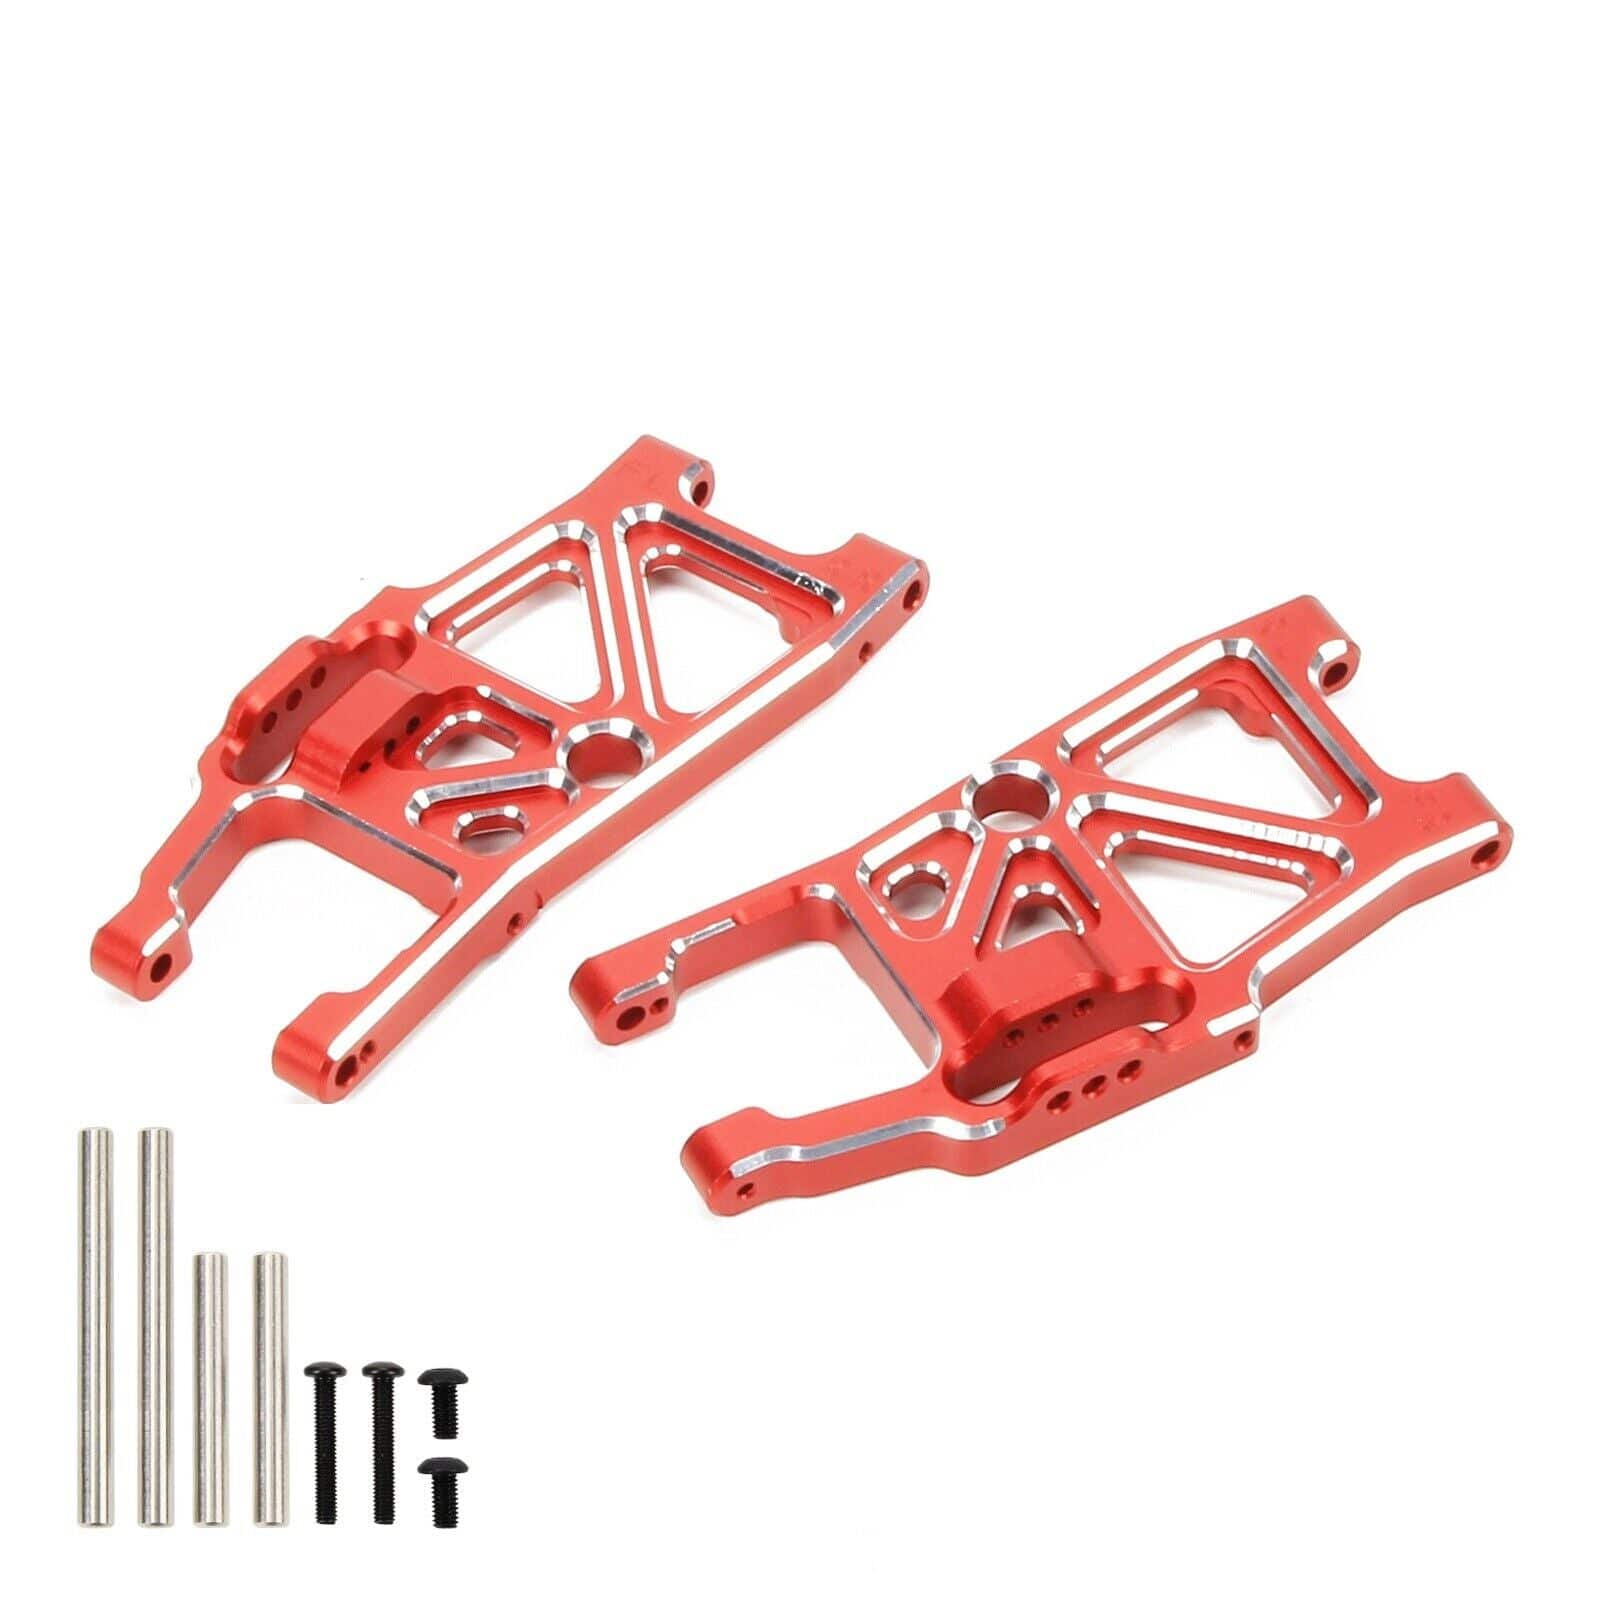 RCAWD Lower Suspension Arm A - arm 8999 for Maxx upgrades - RCAWD